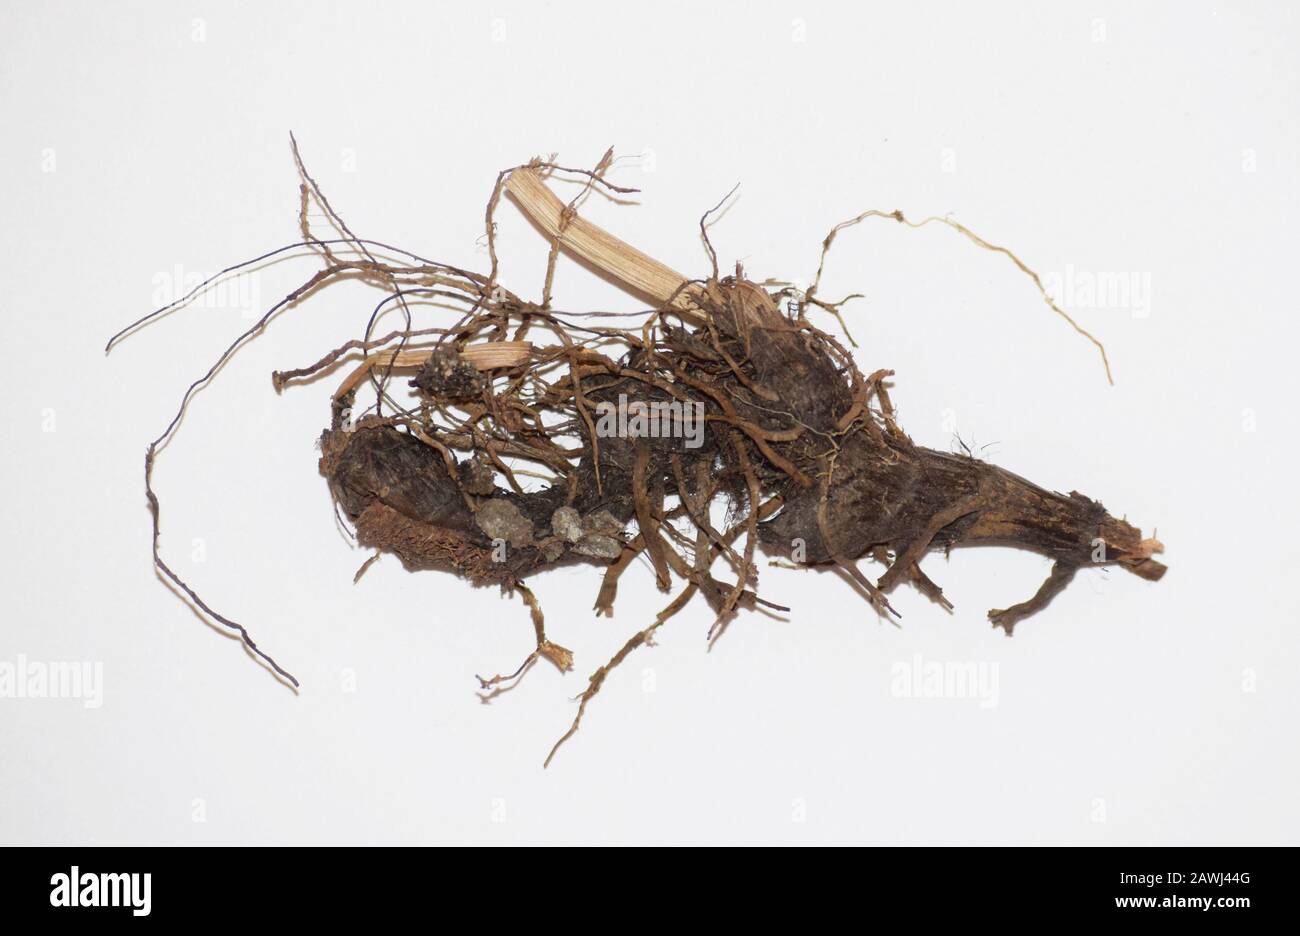 Dried Cypriol or Cyperus scariosis Root also known as Nutgrass in Hindi called Nagarmotha is riverbed plant native to India's Madhyapradesh state. Has Stock Photo